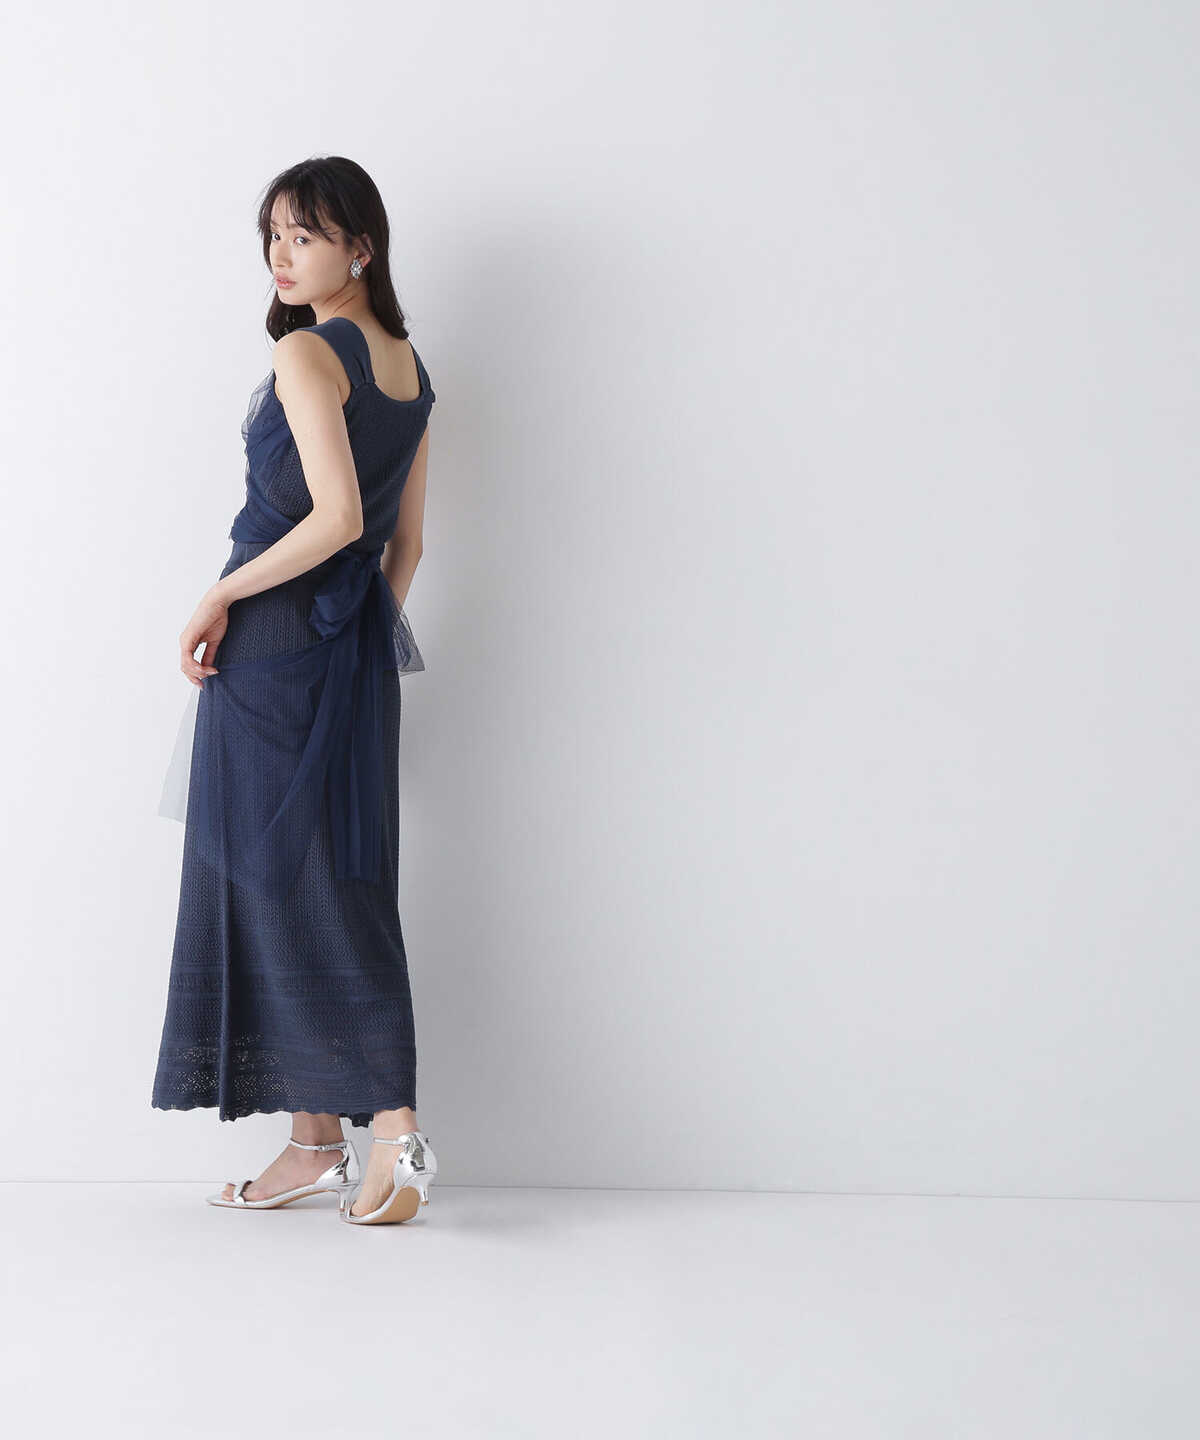 LUMINE・LUCUA・official site限定】透かし編みニットセットアップ ...